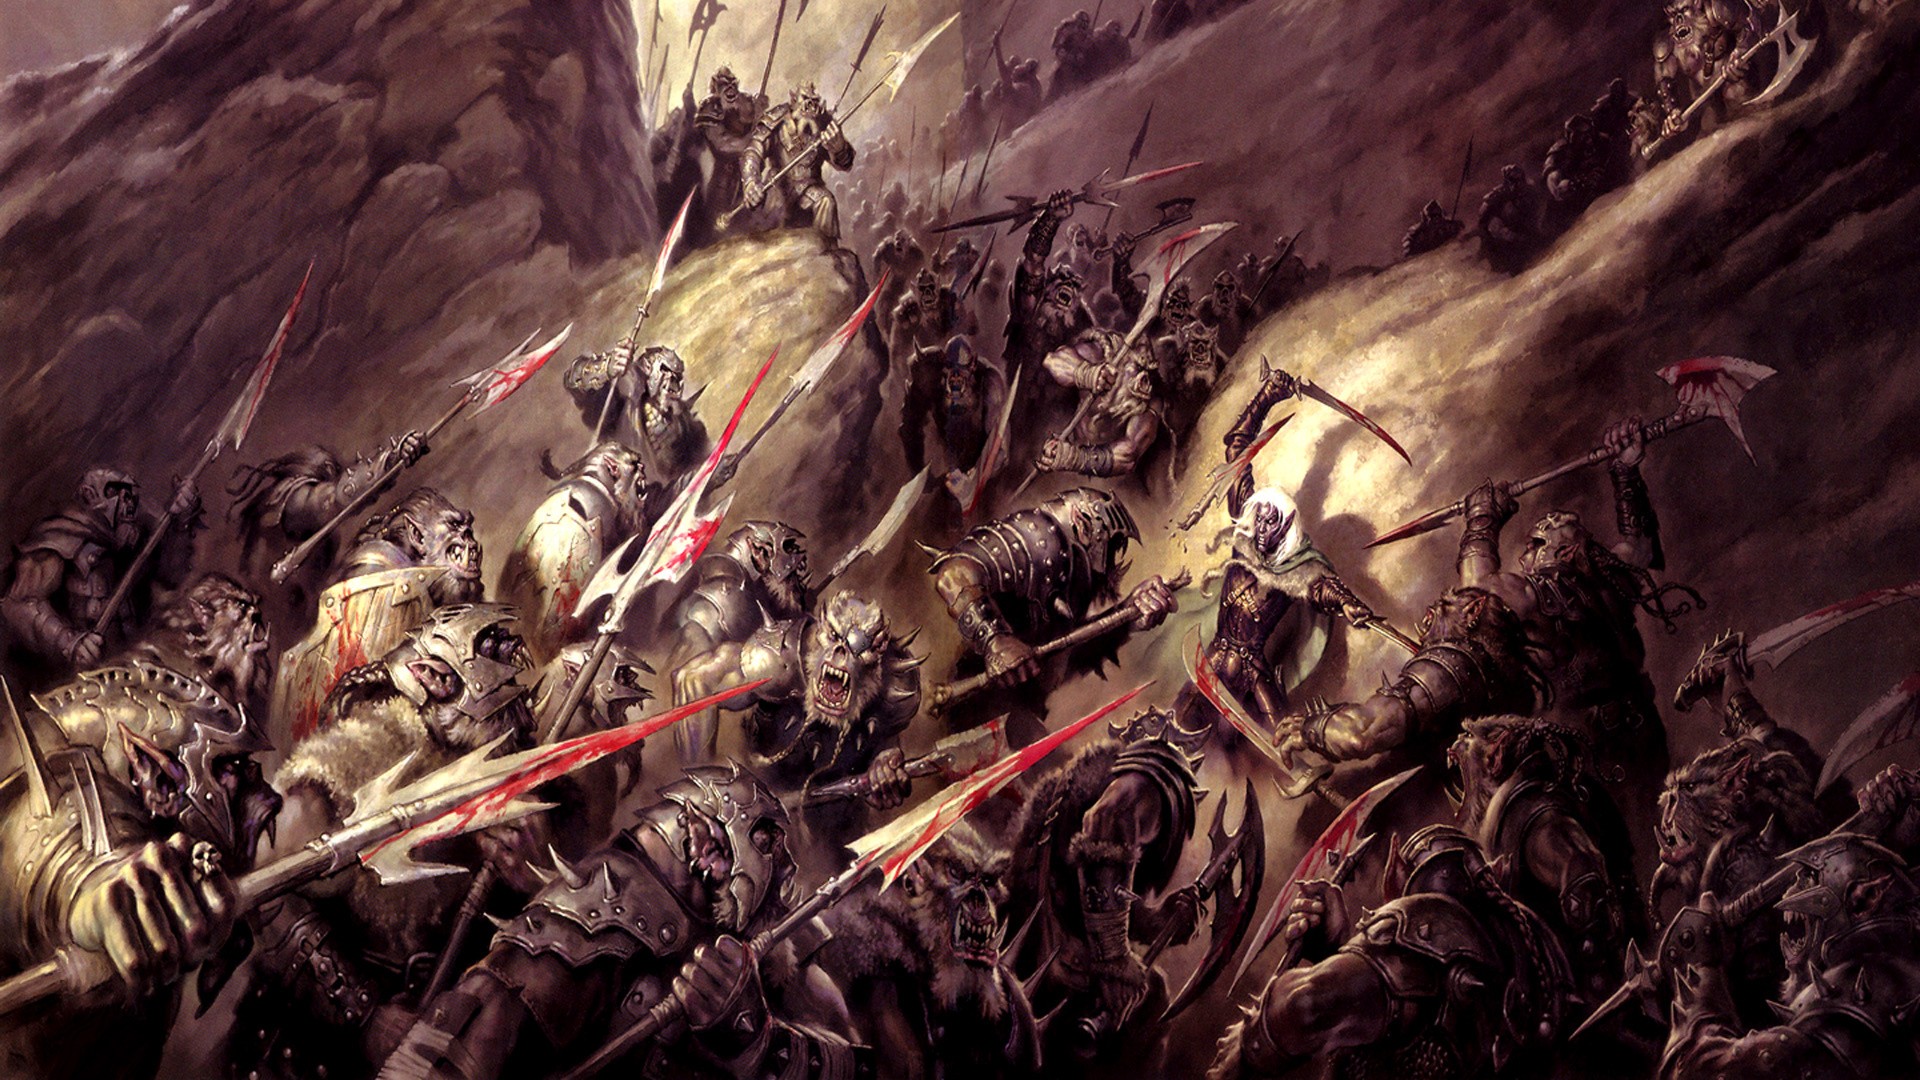 Fantasy Art Armor Dnd Orcs Axes Dungeons And Dragons Spears Drizzt